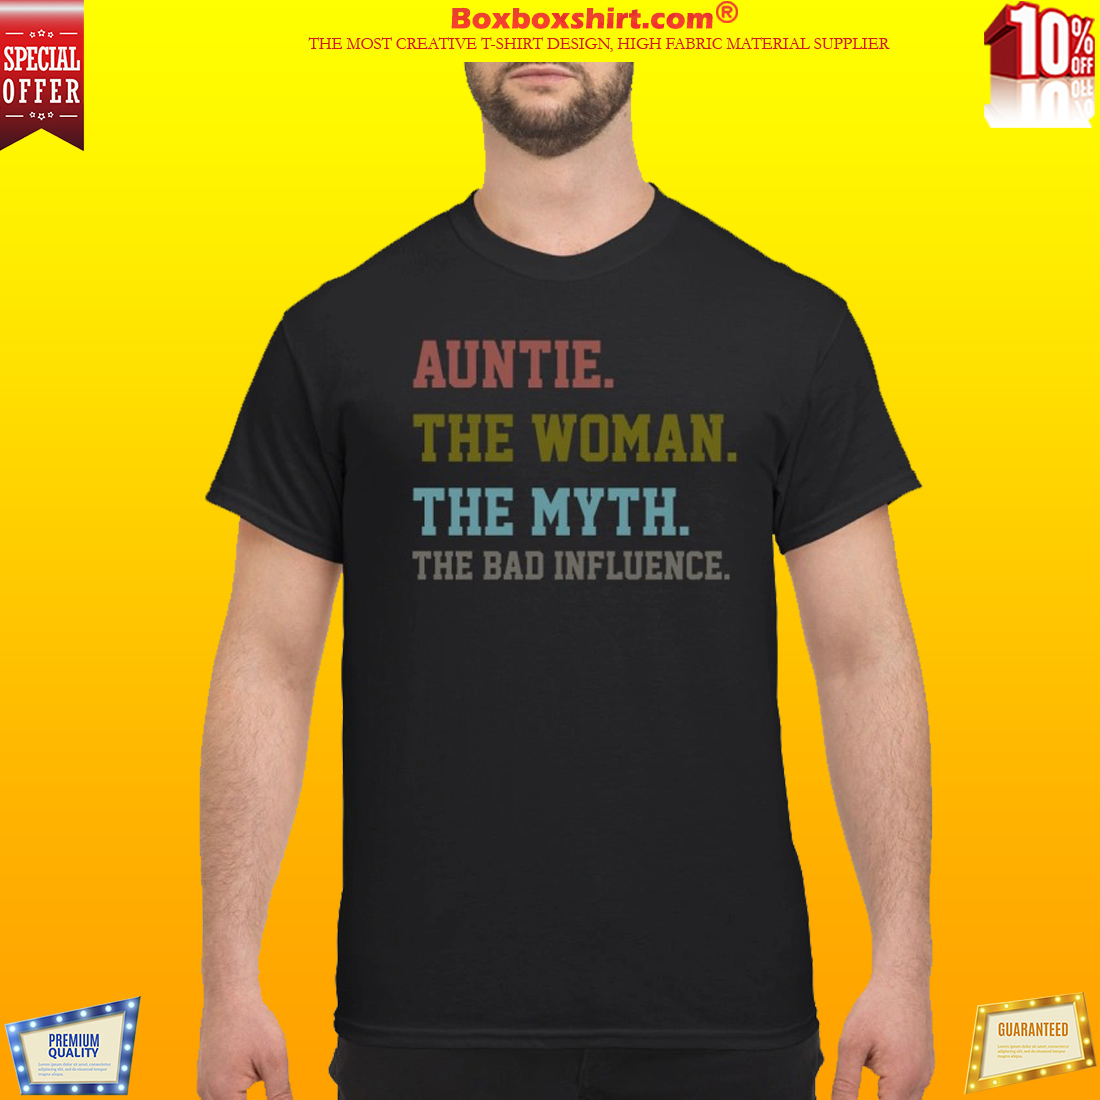 Auntie the woman the myth the bad influence classic shirt